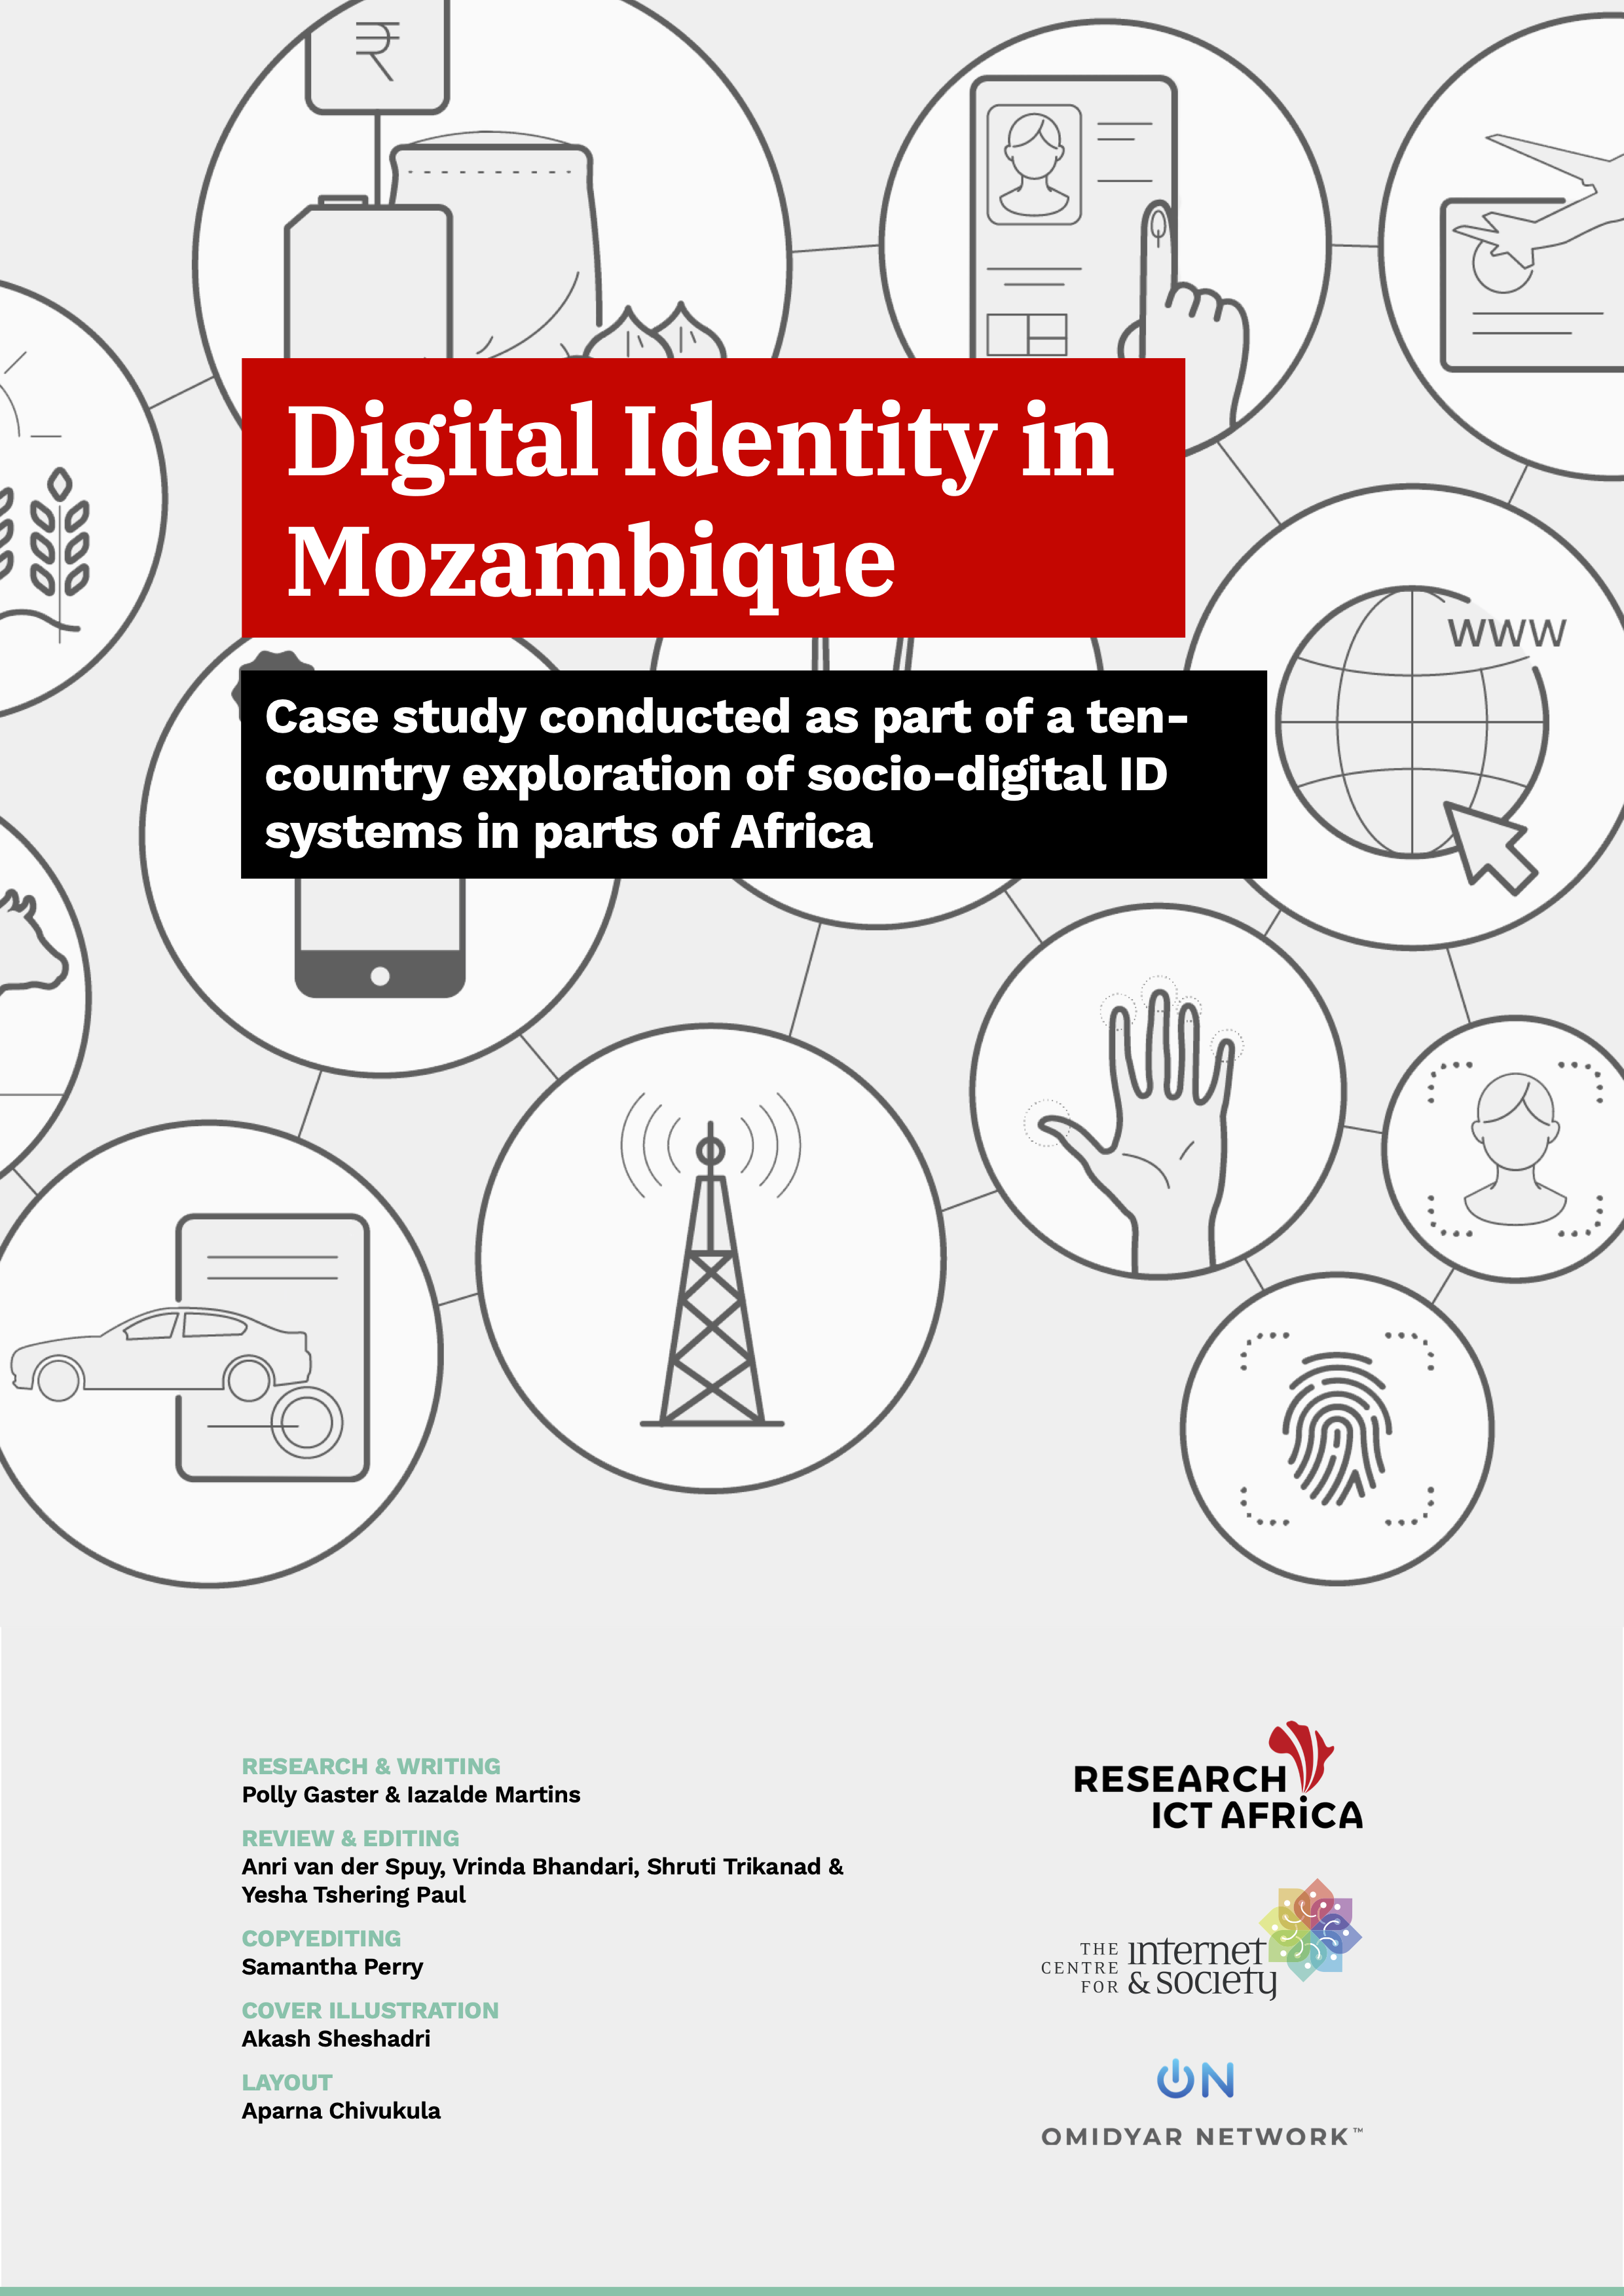 Cover page of Mozambique case study